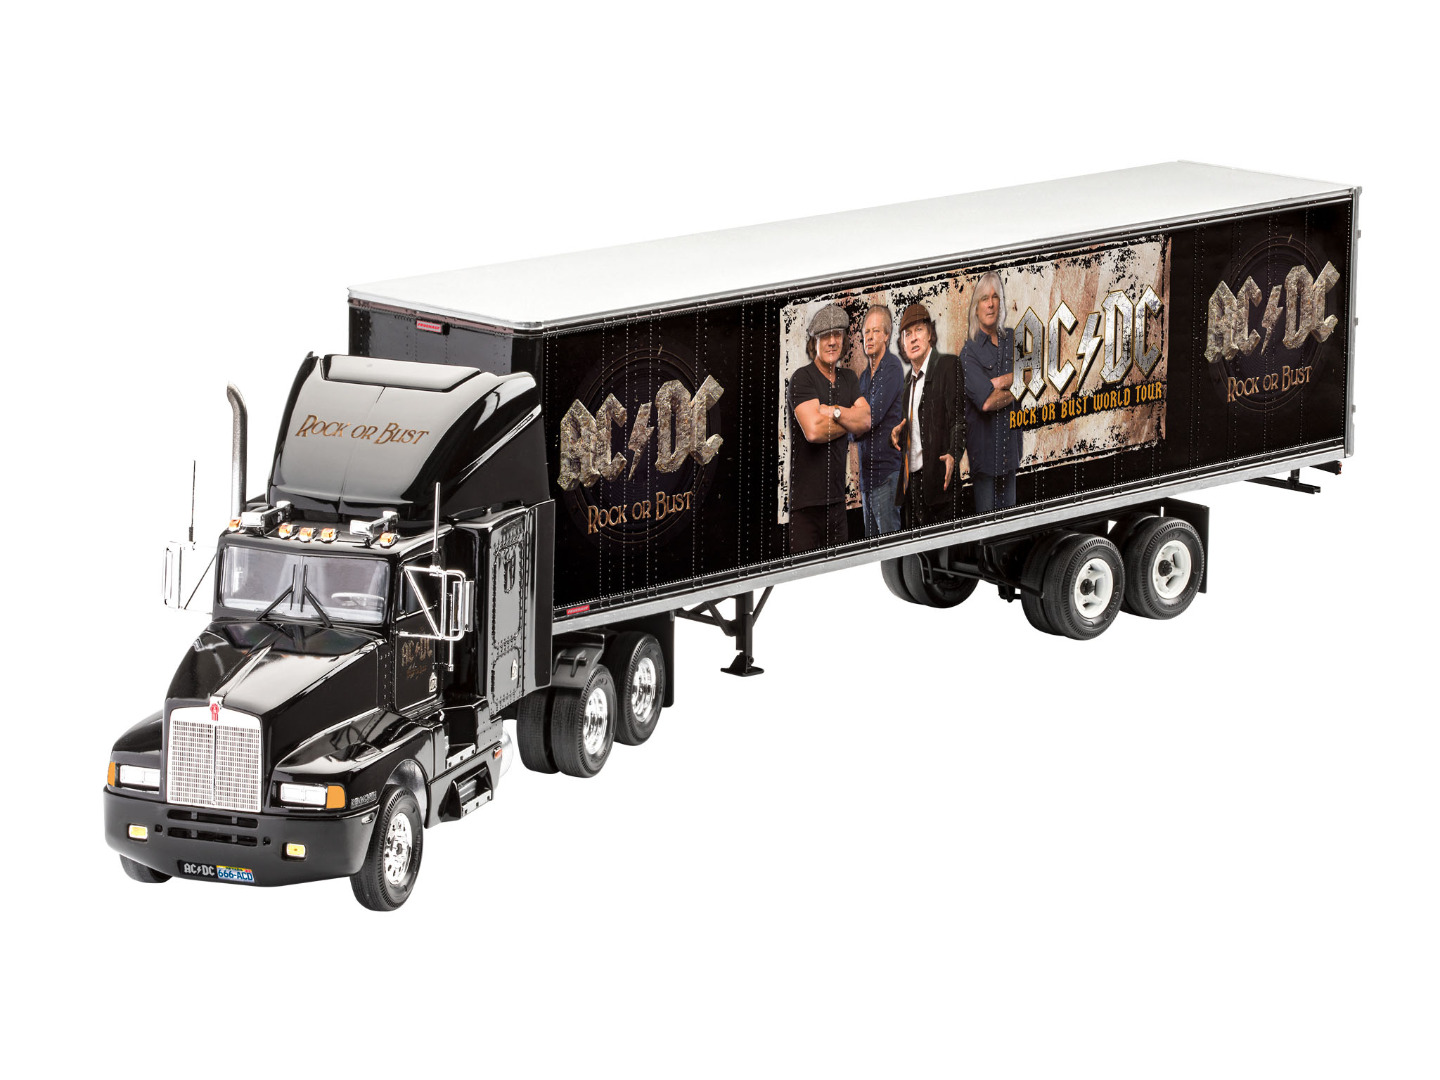 Revell Model Set Tour Truck AC/DC Limited Edition 1:32